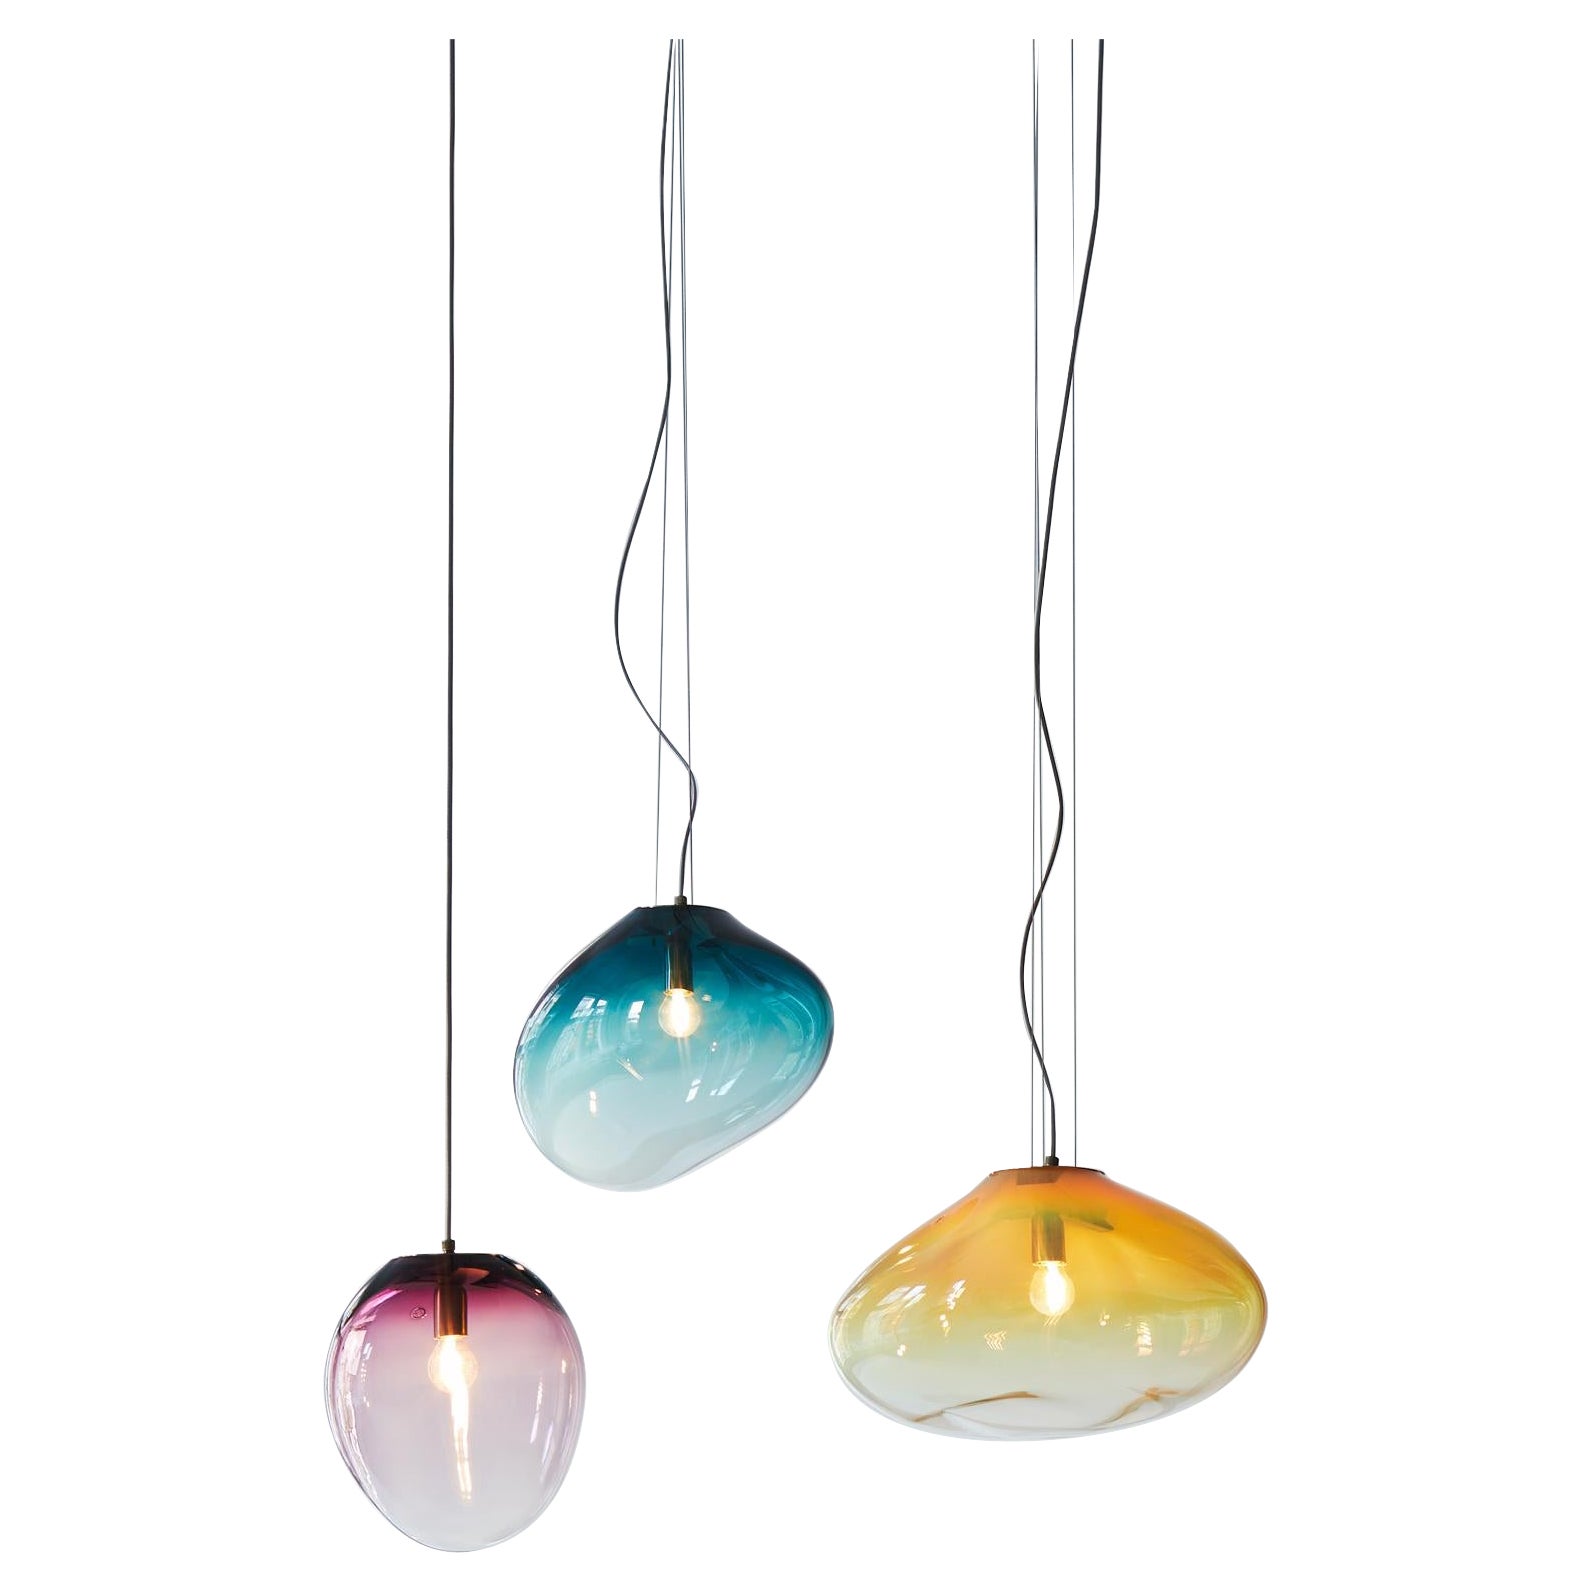 Sedna Ceiling Lamp, Hand-Blown Murano Glass, 2021, Size "S"